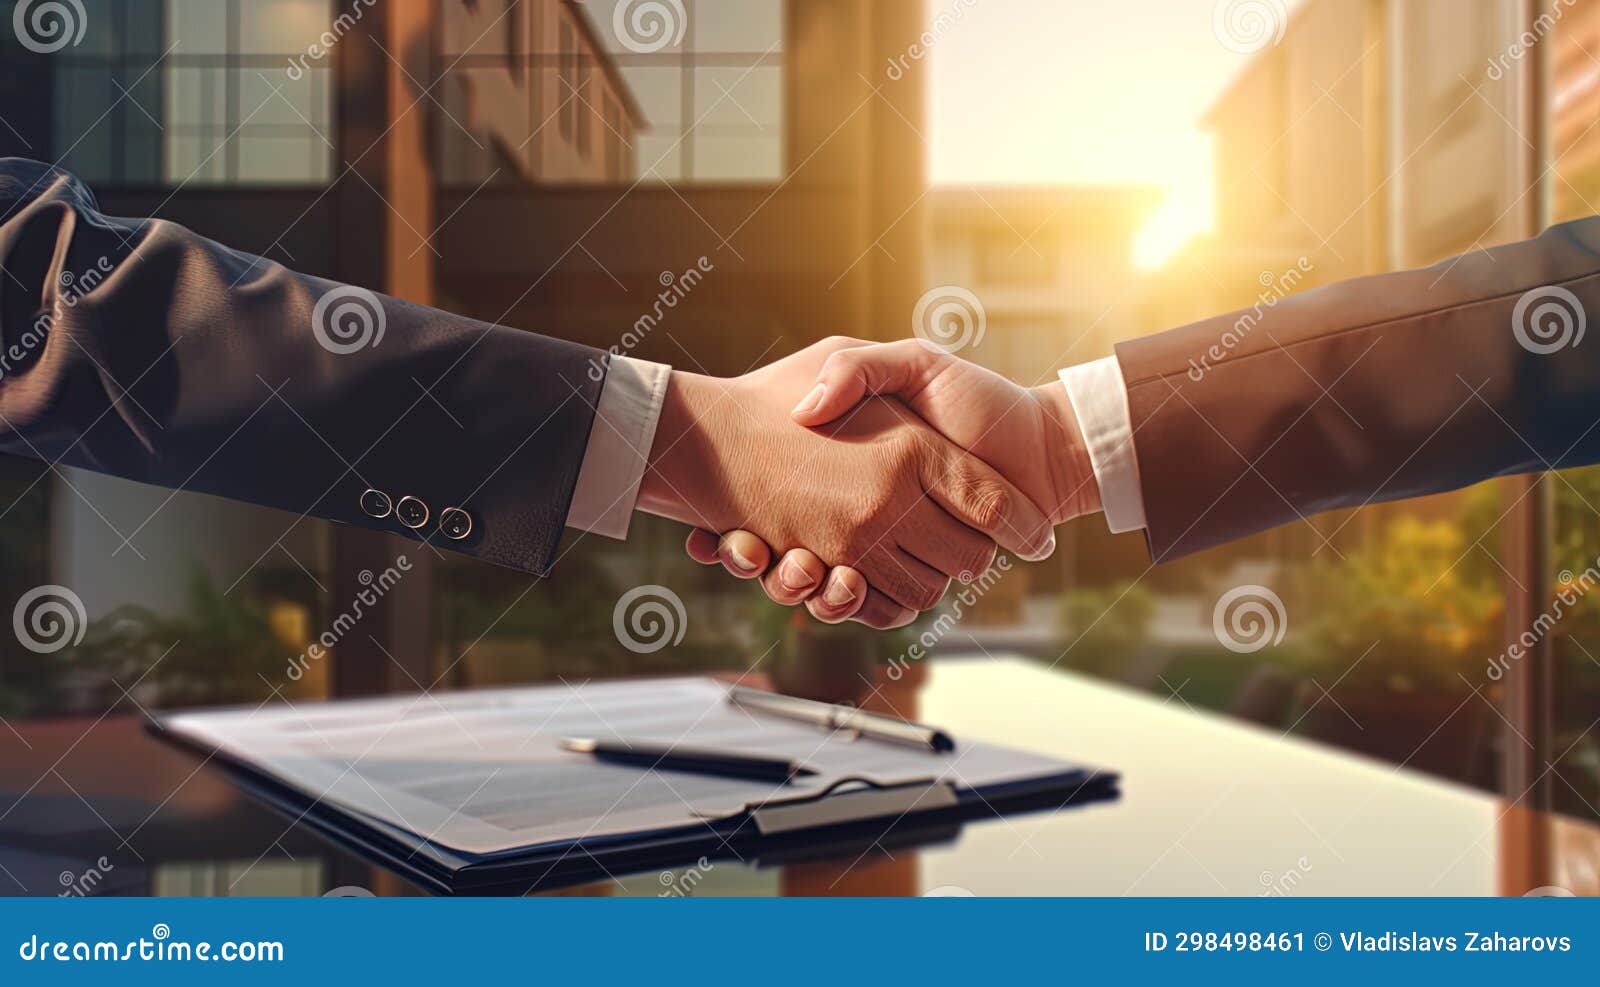 mutual satisfaction evident as the landlord agent and client shake hands following the signed renta